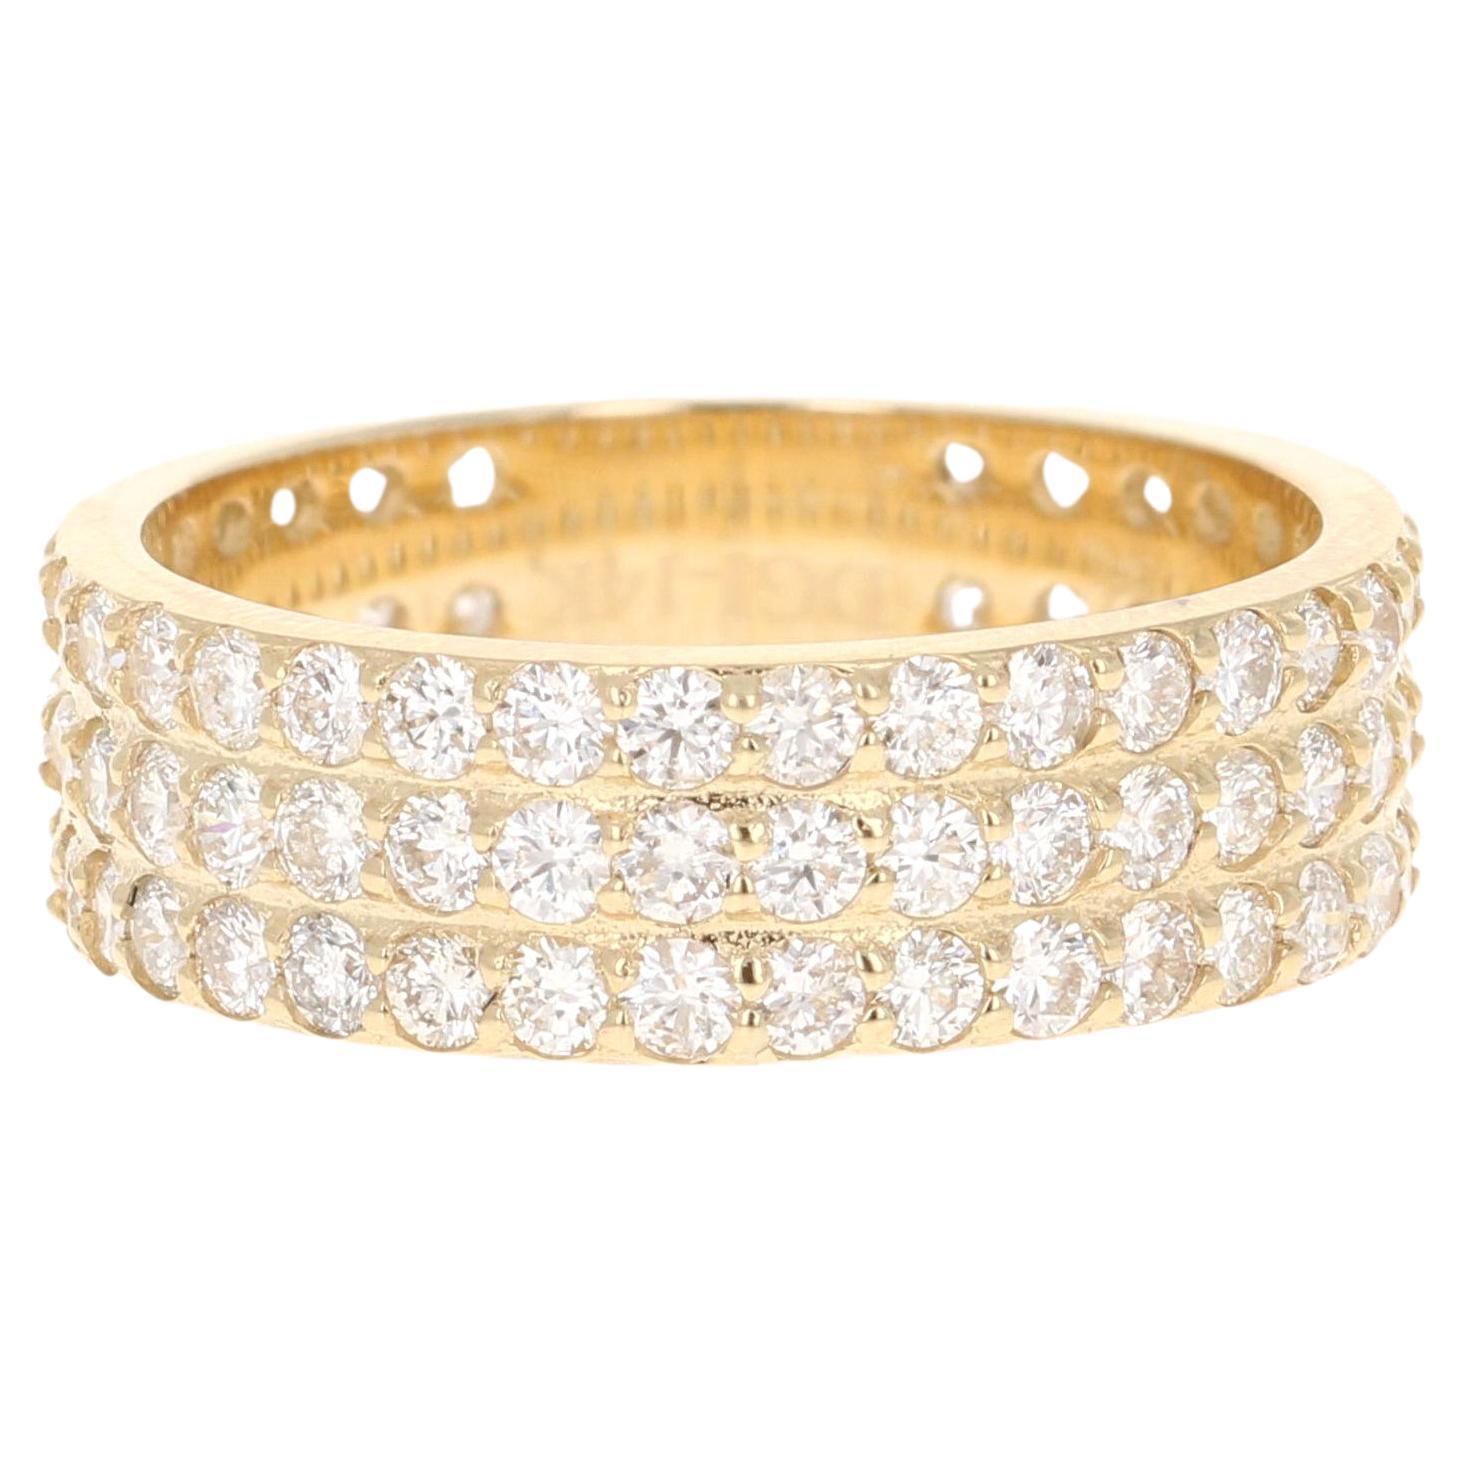 2.22 Carat Diamond Yellow Gold Band For Sale